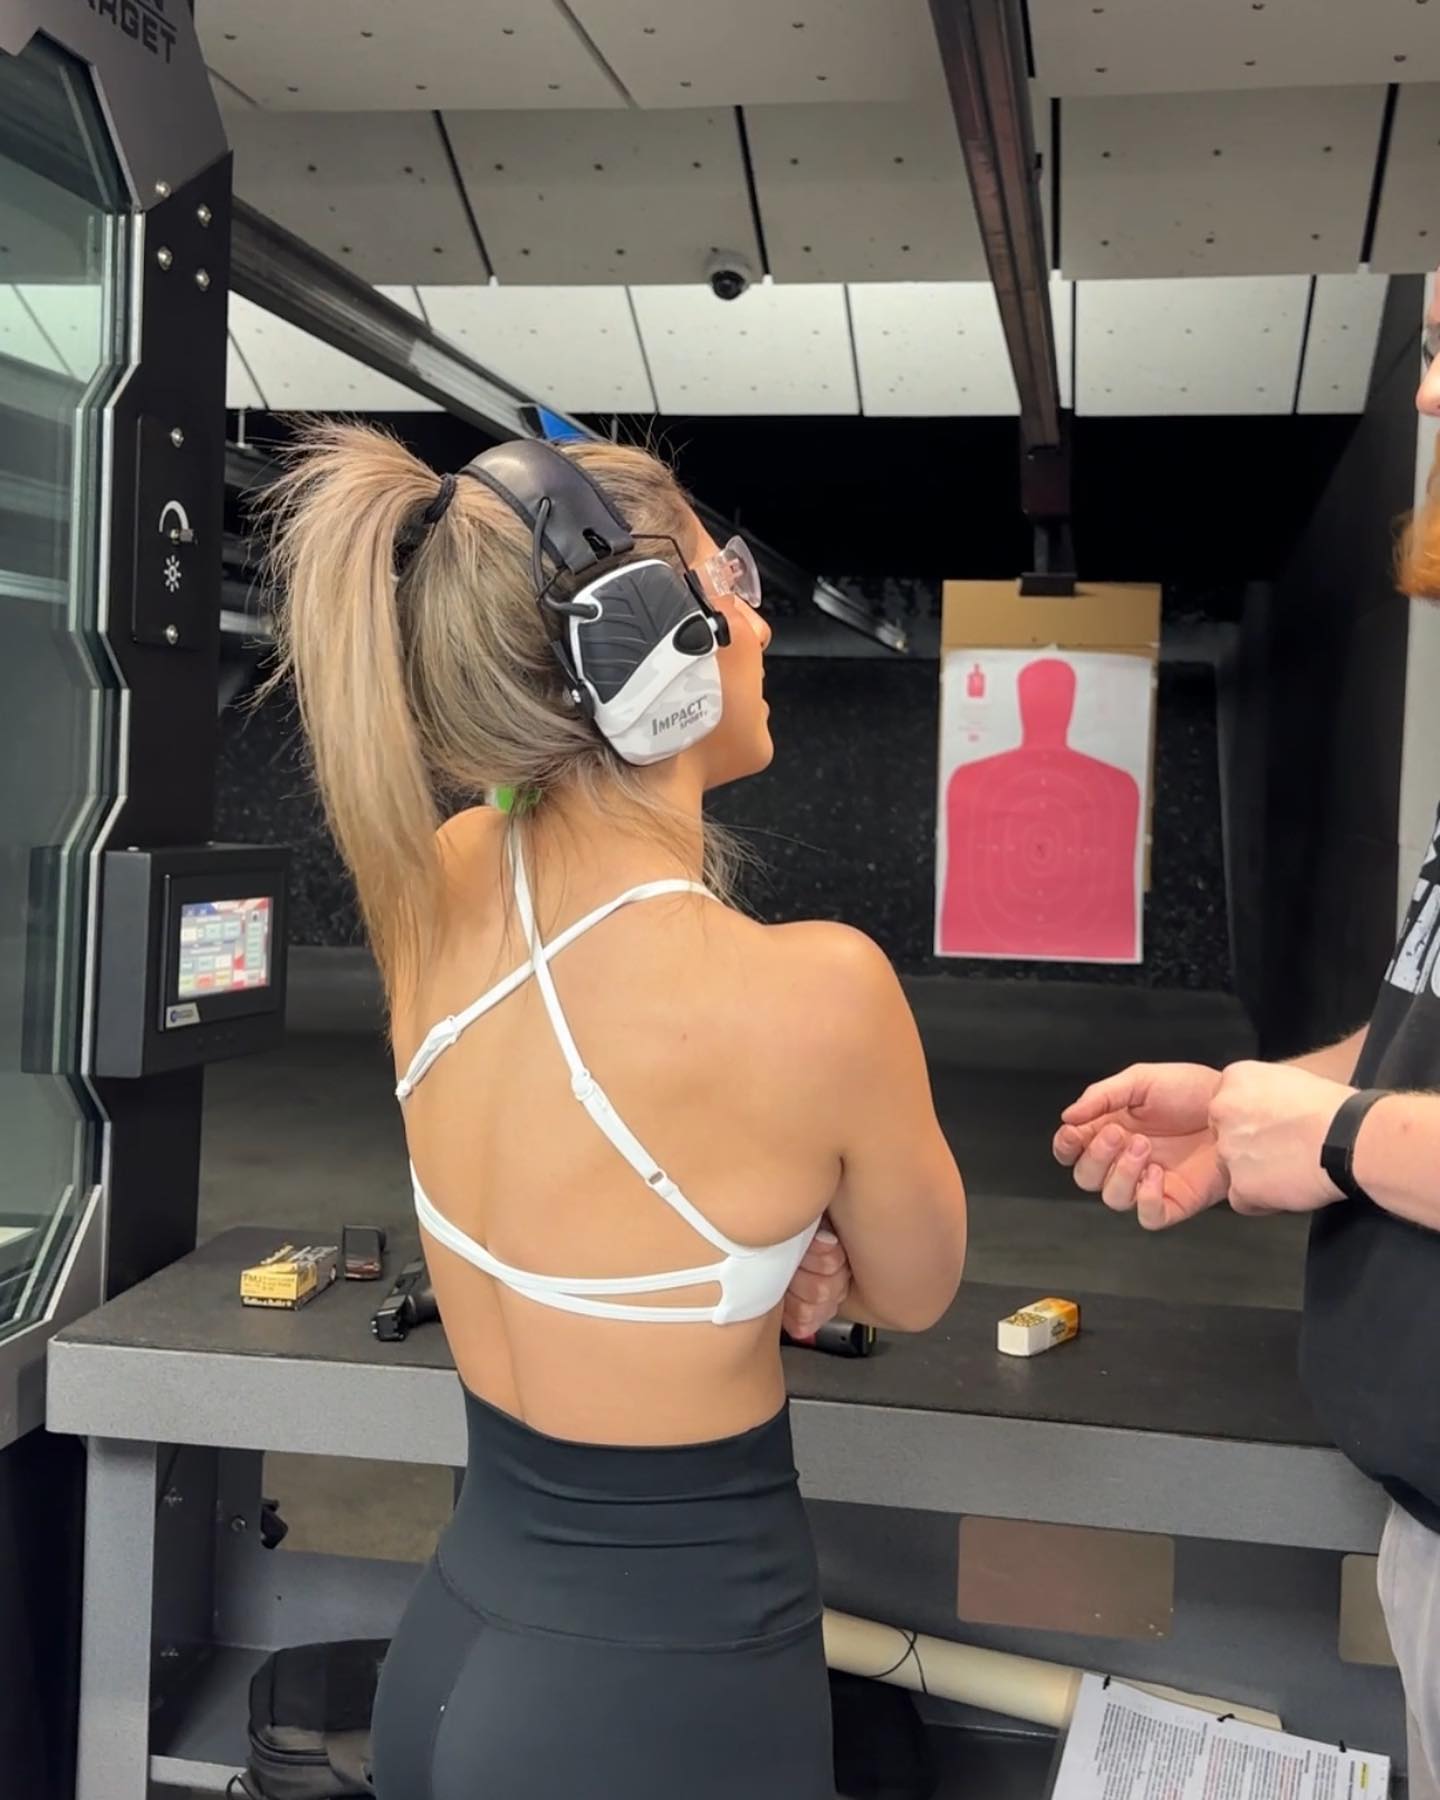 This was an experience I honestly needed. I learned a lot and it was fun. 
At first I was so scared and my body was not used to it but after a little bit I was okay. 
If you want to try something go for it , don’t wait for others when you can just take yourself and have fun. 
#gunrange #funexperience